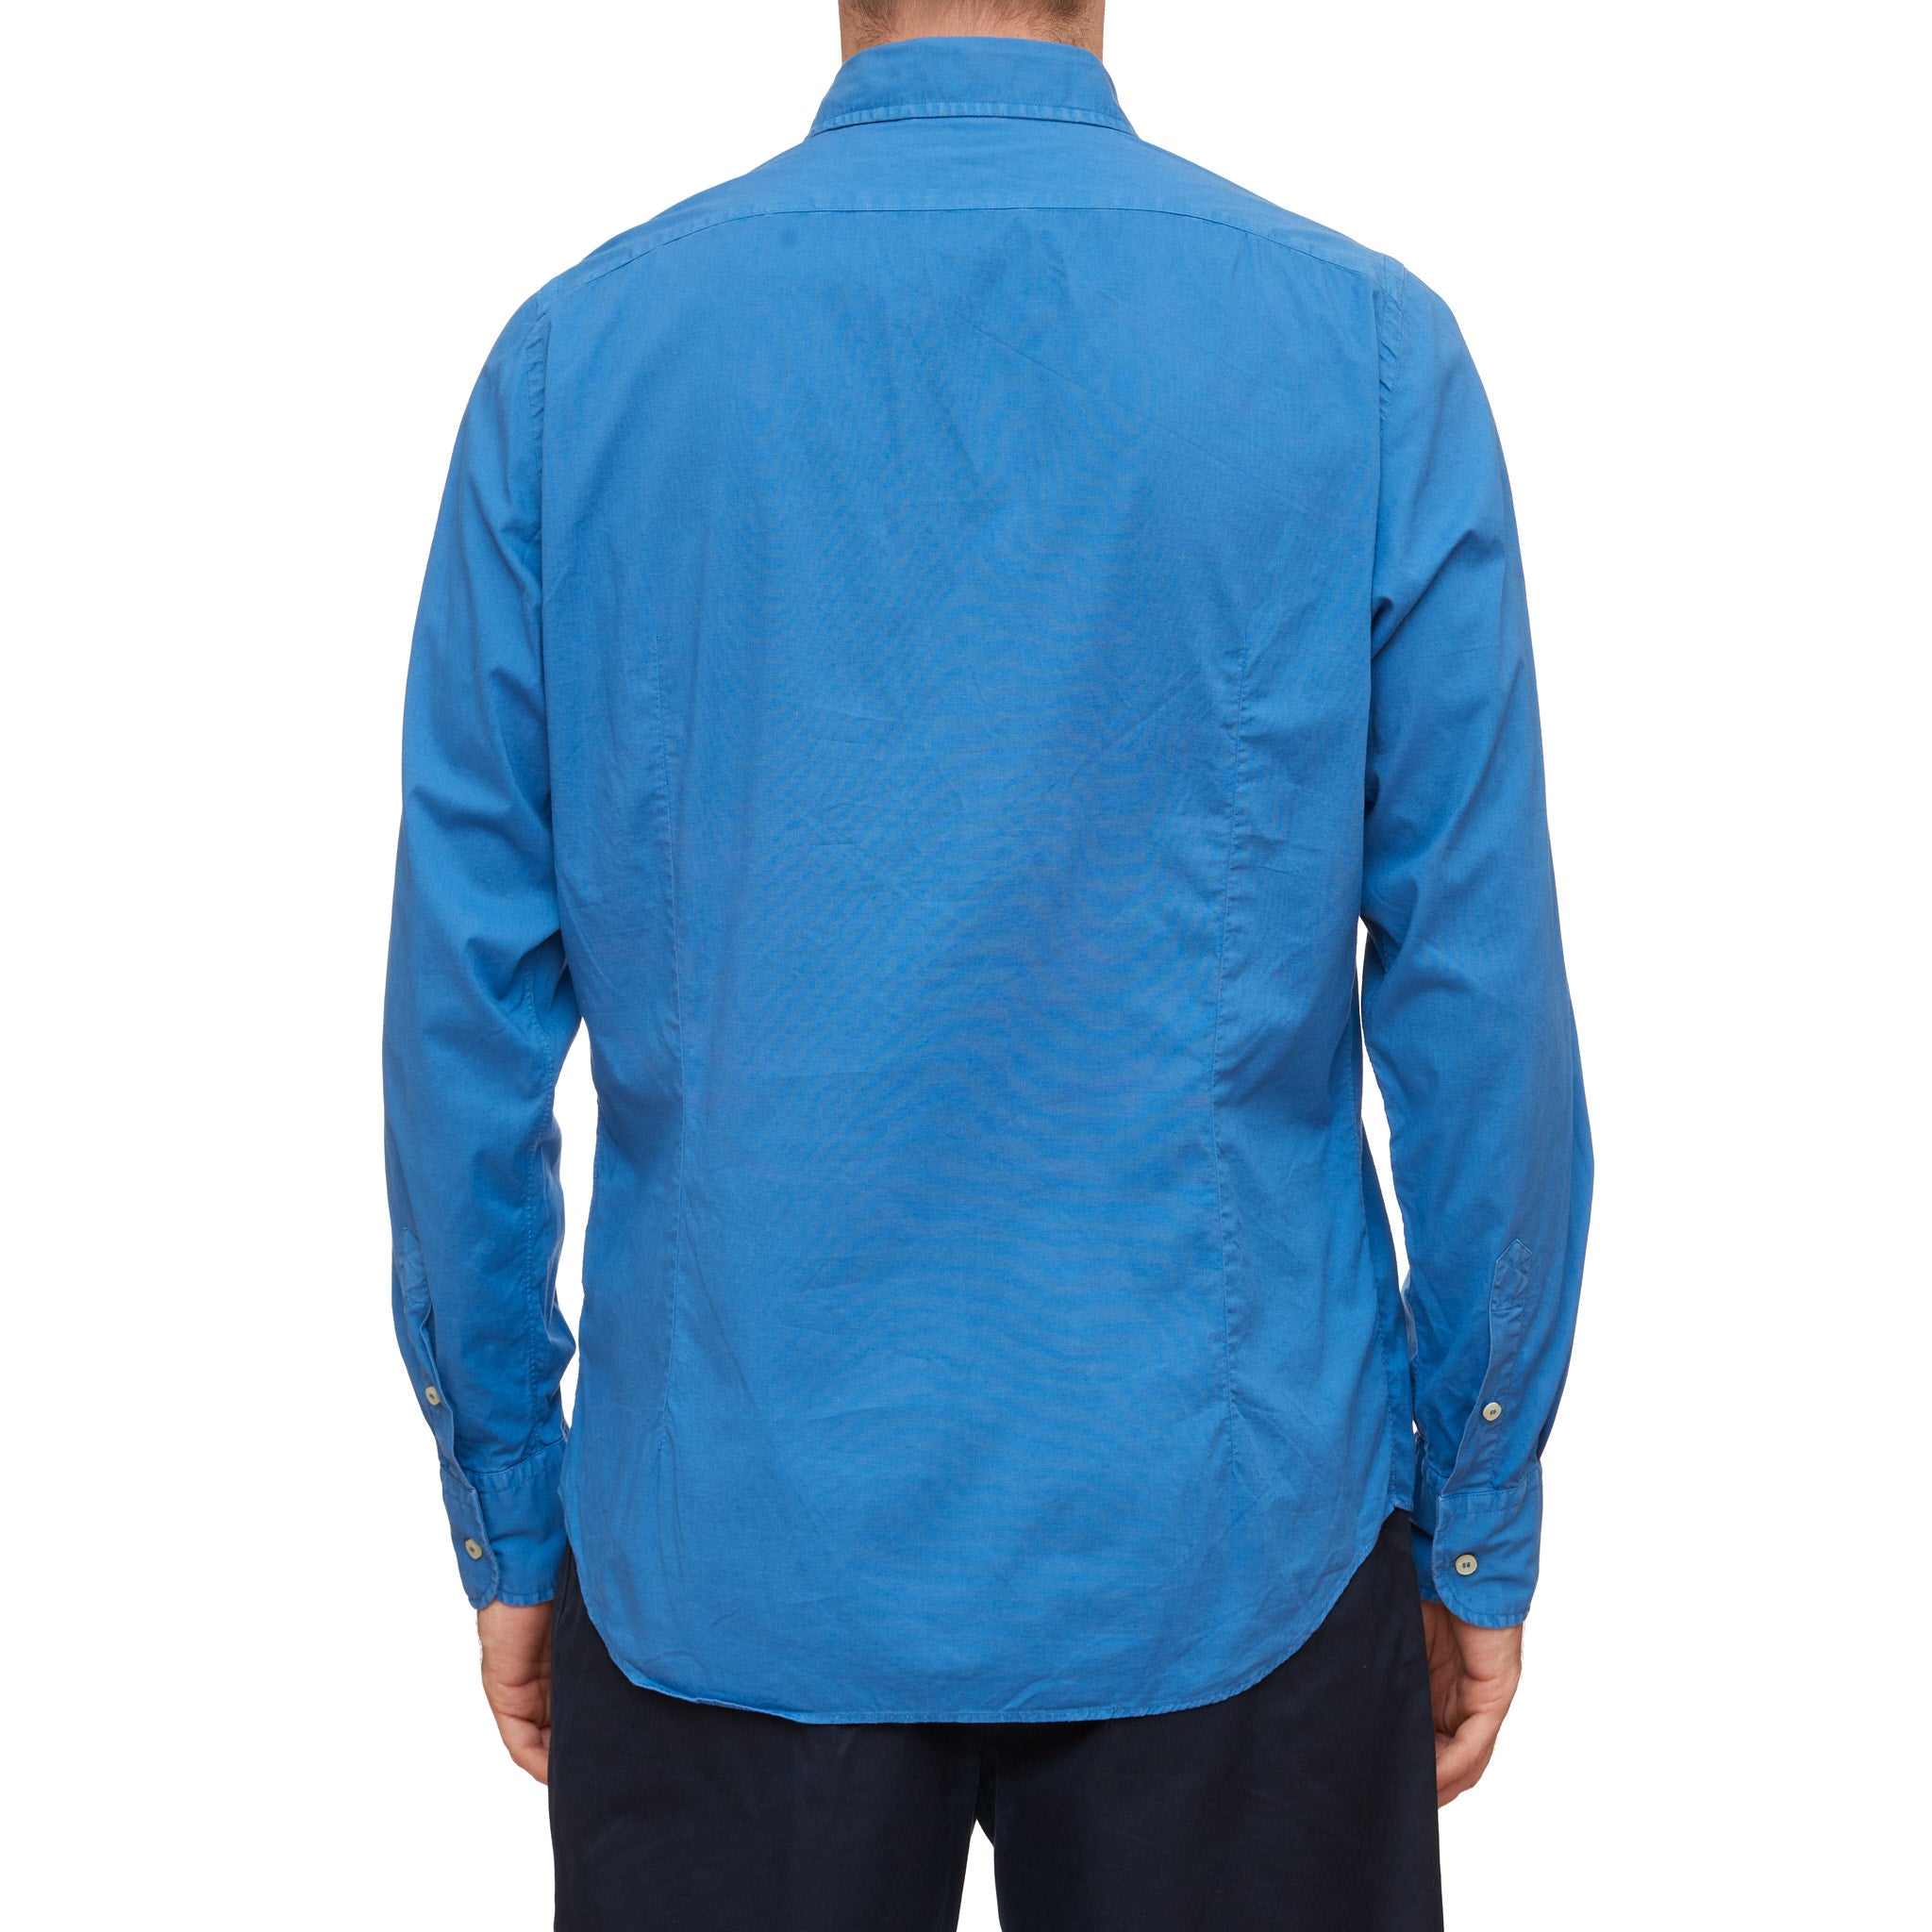 Lapo Elkann's iTALIA INDEPENDENT Blue Popover Long Sleeve Pullover Shirt Size XL Slim Fit ITALIA INDEPENDENT